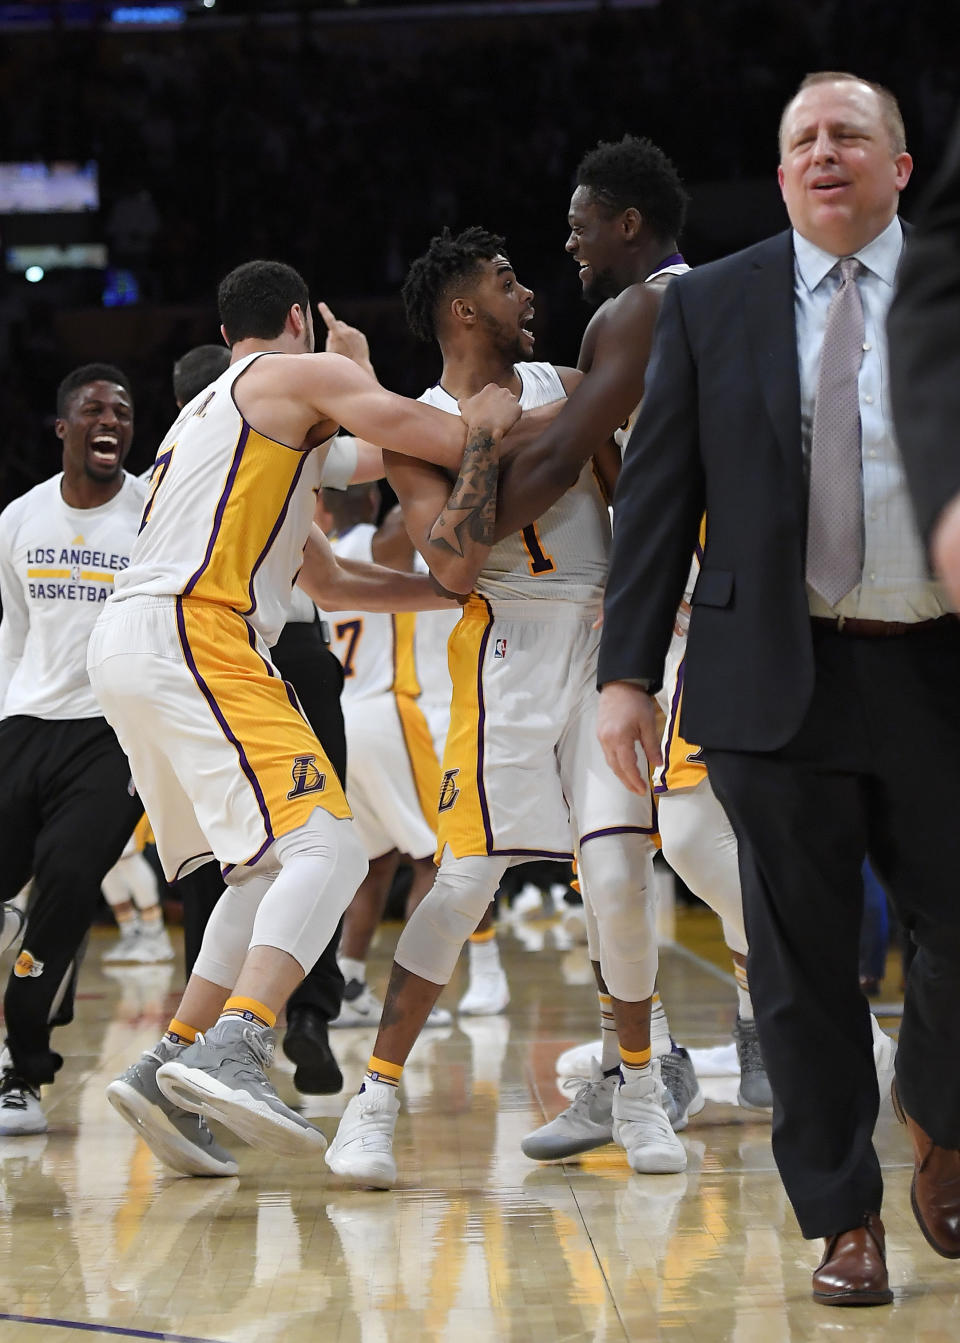 Los Angeles Lakers guard D'Angelo Russell (1) celebrates with teammates after hitting a game-winning three point shot as Minnesota Timberwolves head coach Tom Thibodeau walks off the court during the second half of an NBA basketball game, Sunday, April 9, 2017, in Los Angeles. The Lakers won 110-109. (AP Photo/Mark J. Terrill)